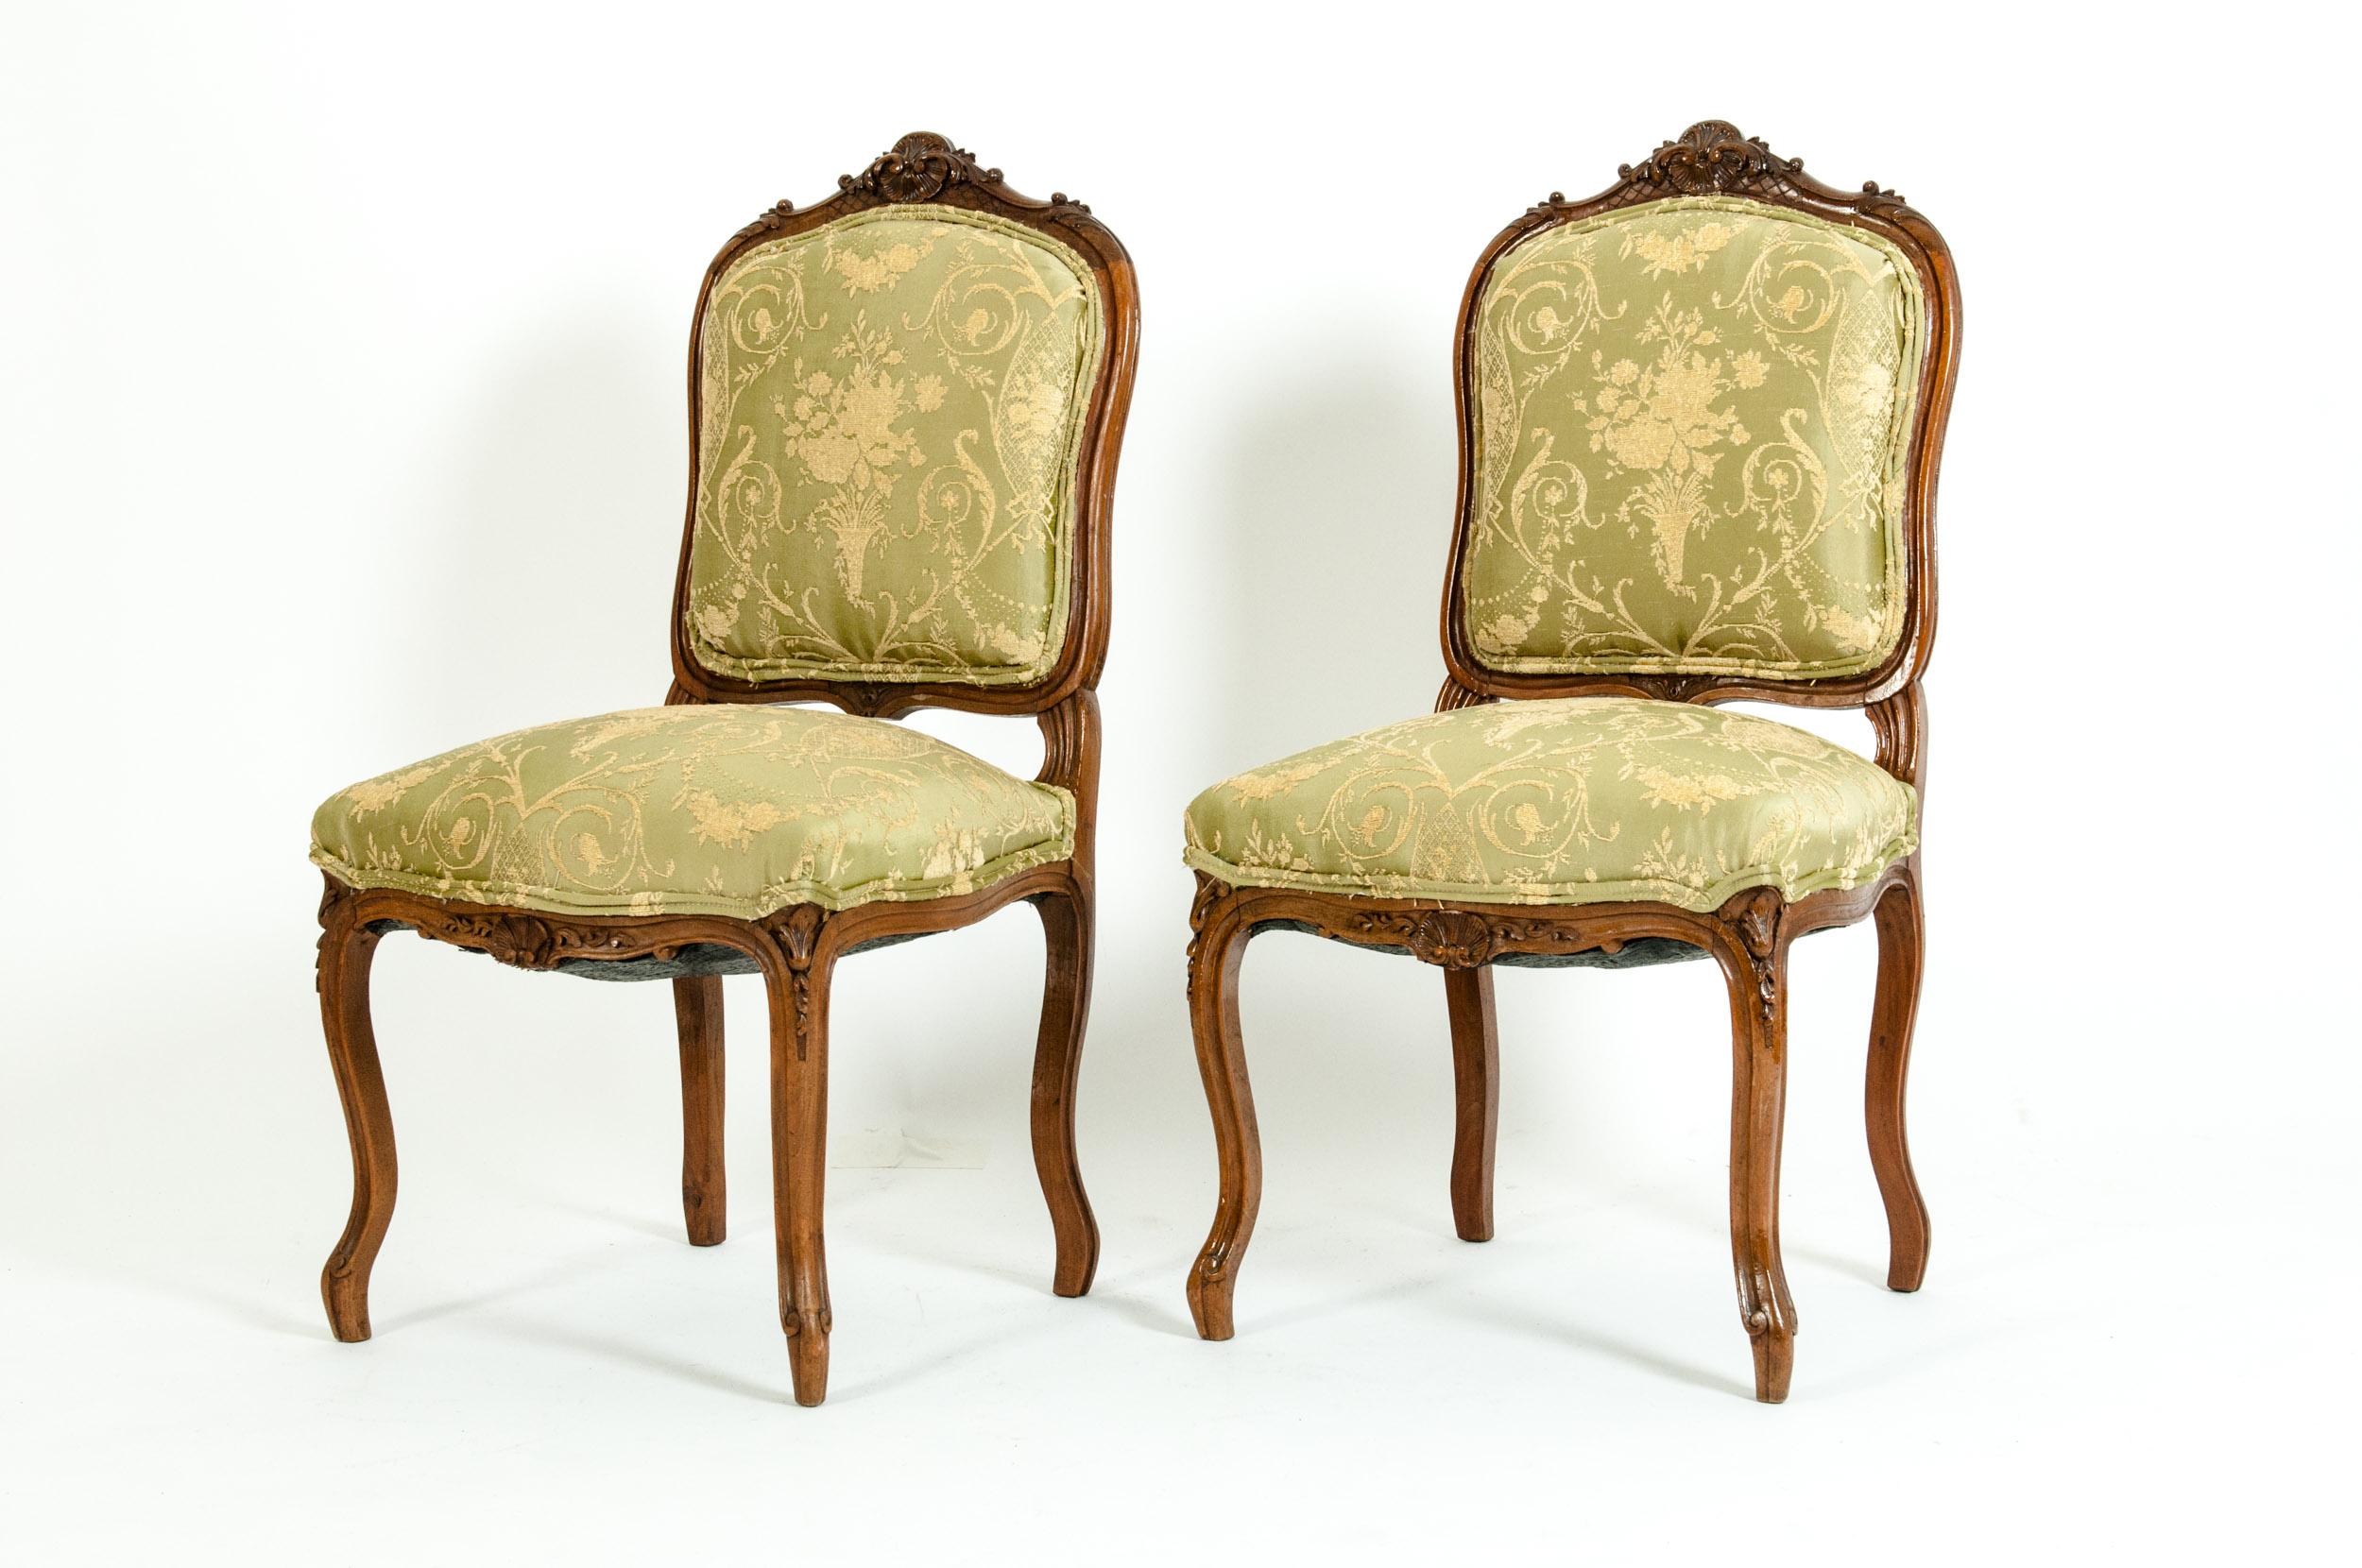 Upholstery Mid-19th Century Mahogany Wood Frame Side Chairs